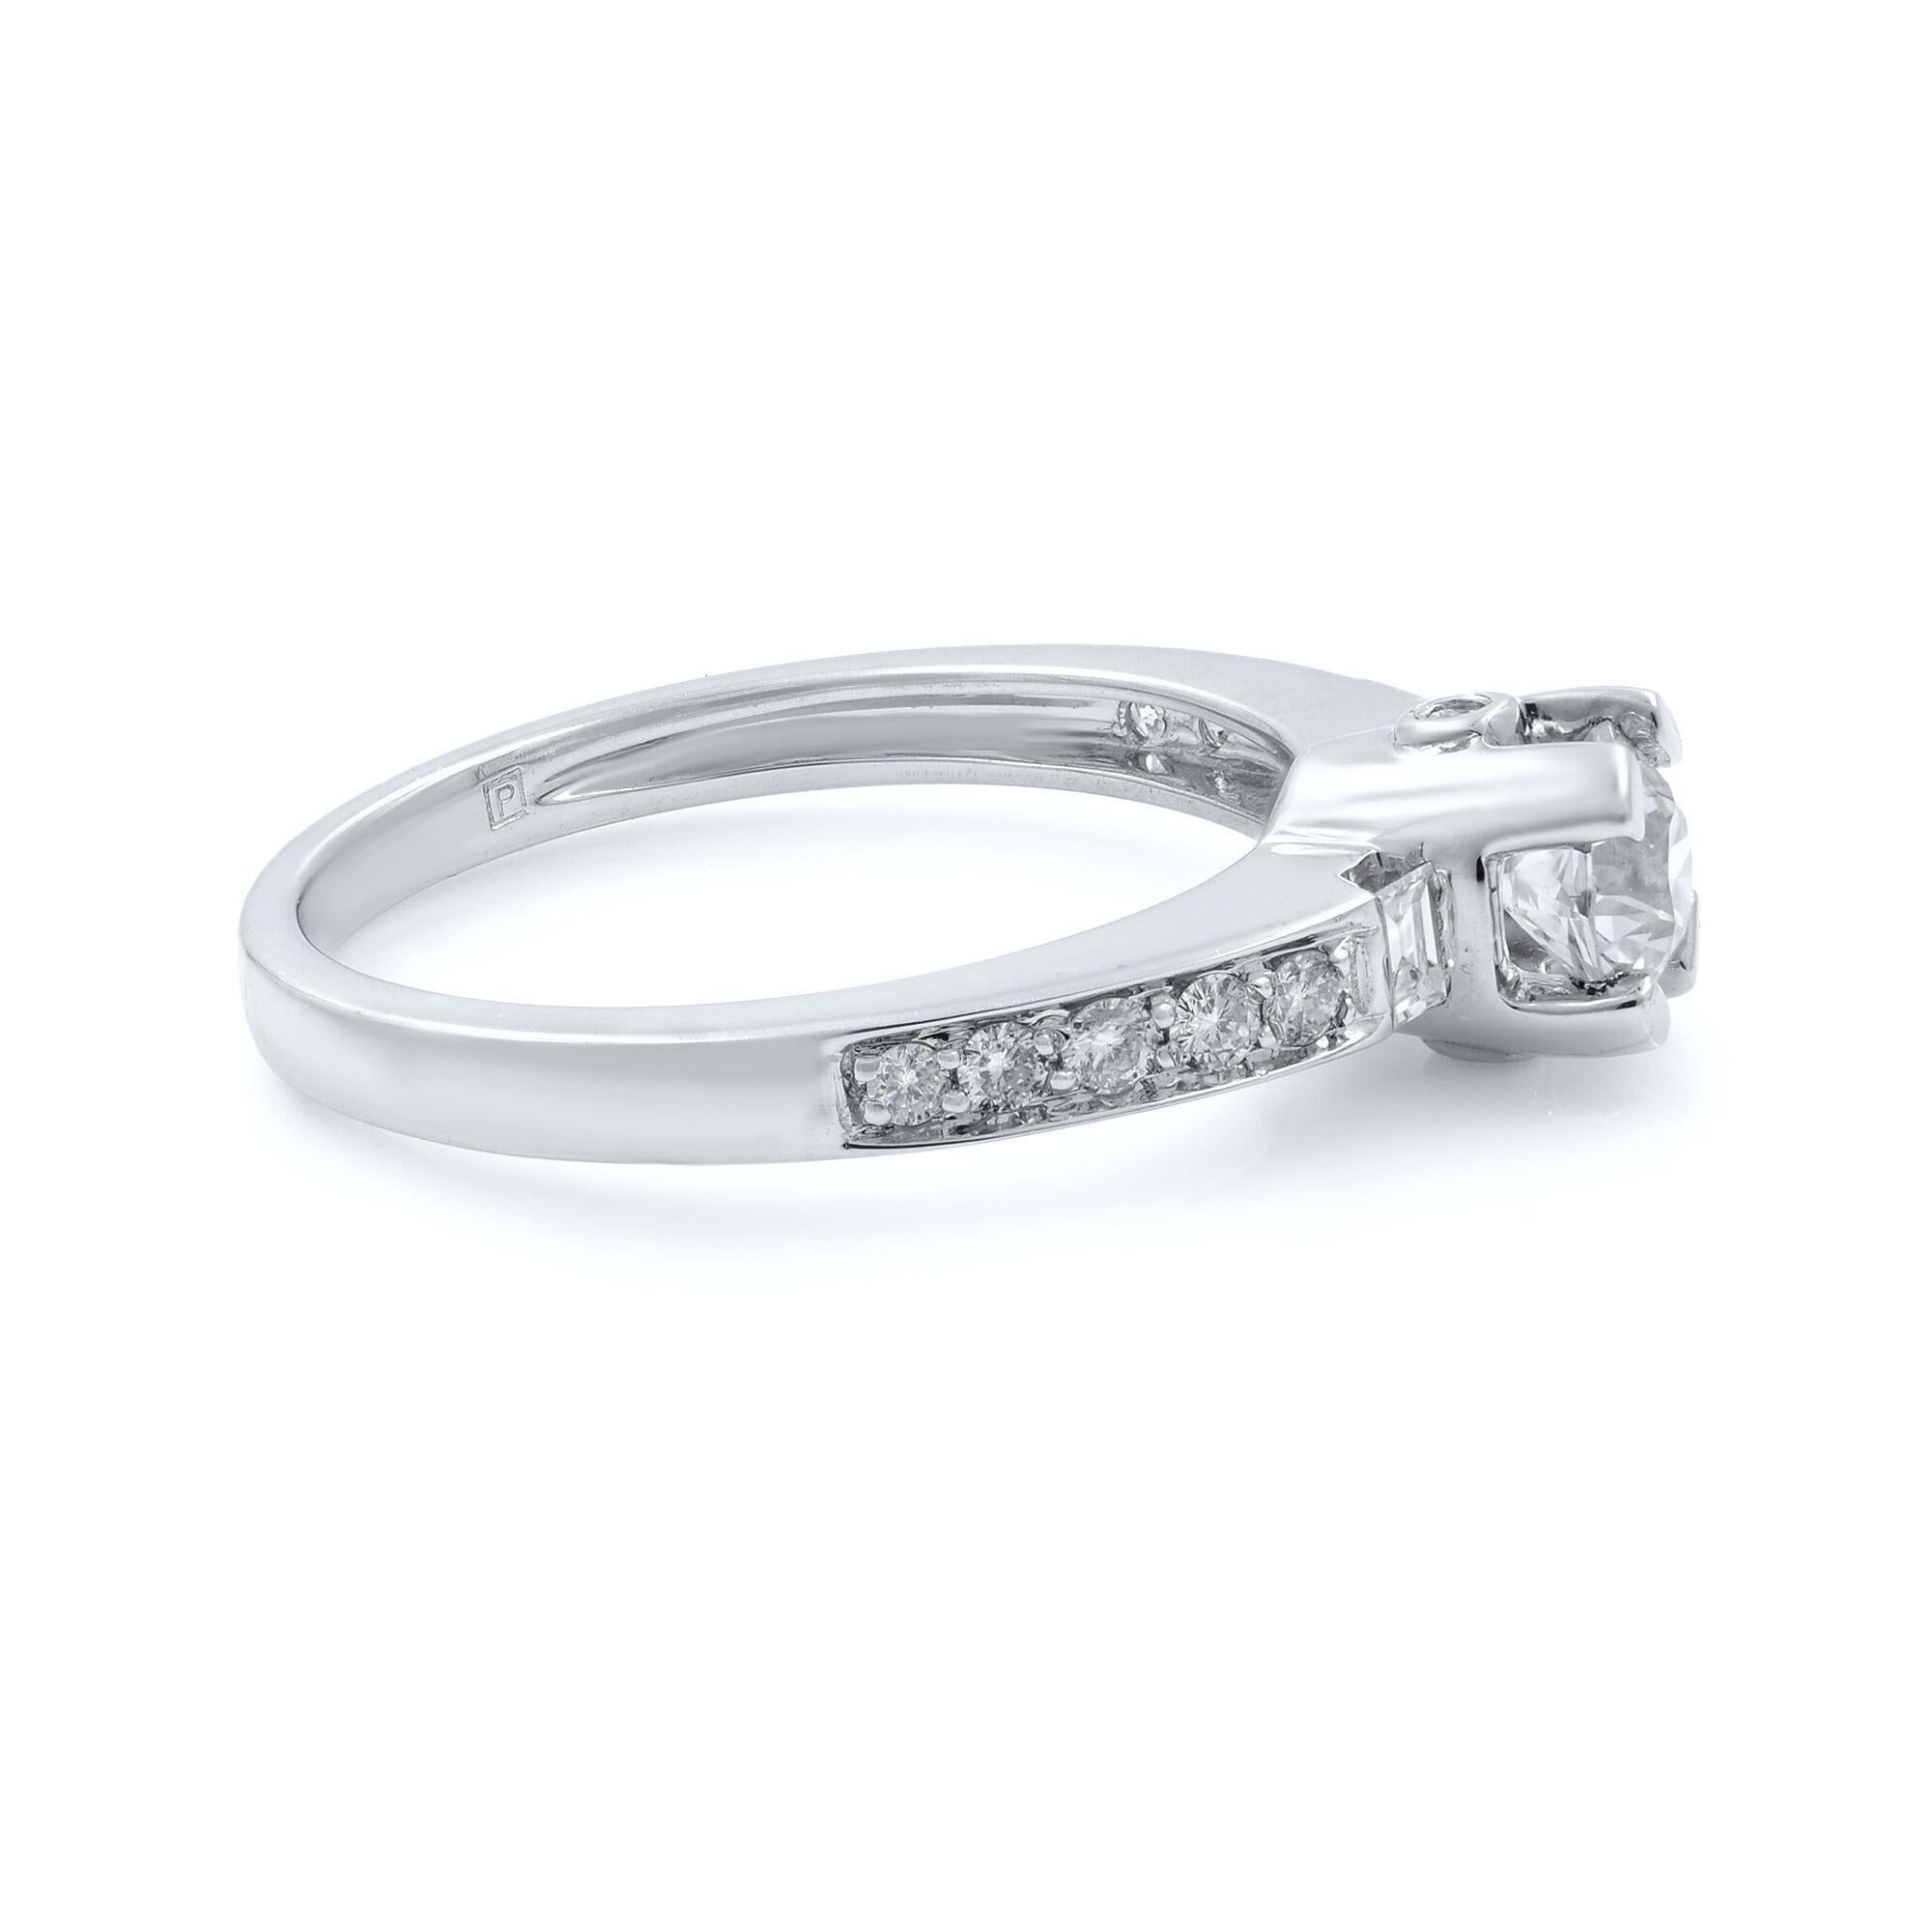 This beautiful diamond engagement ring exceptionally holds a round cut 0.55ct center diamond, which is beautifully held in a prong setting crafted in 14k white gold. Adding grace to the ring, the shank is set with tiny round cut and baguette cut